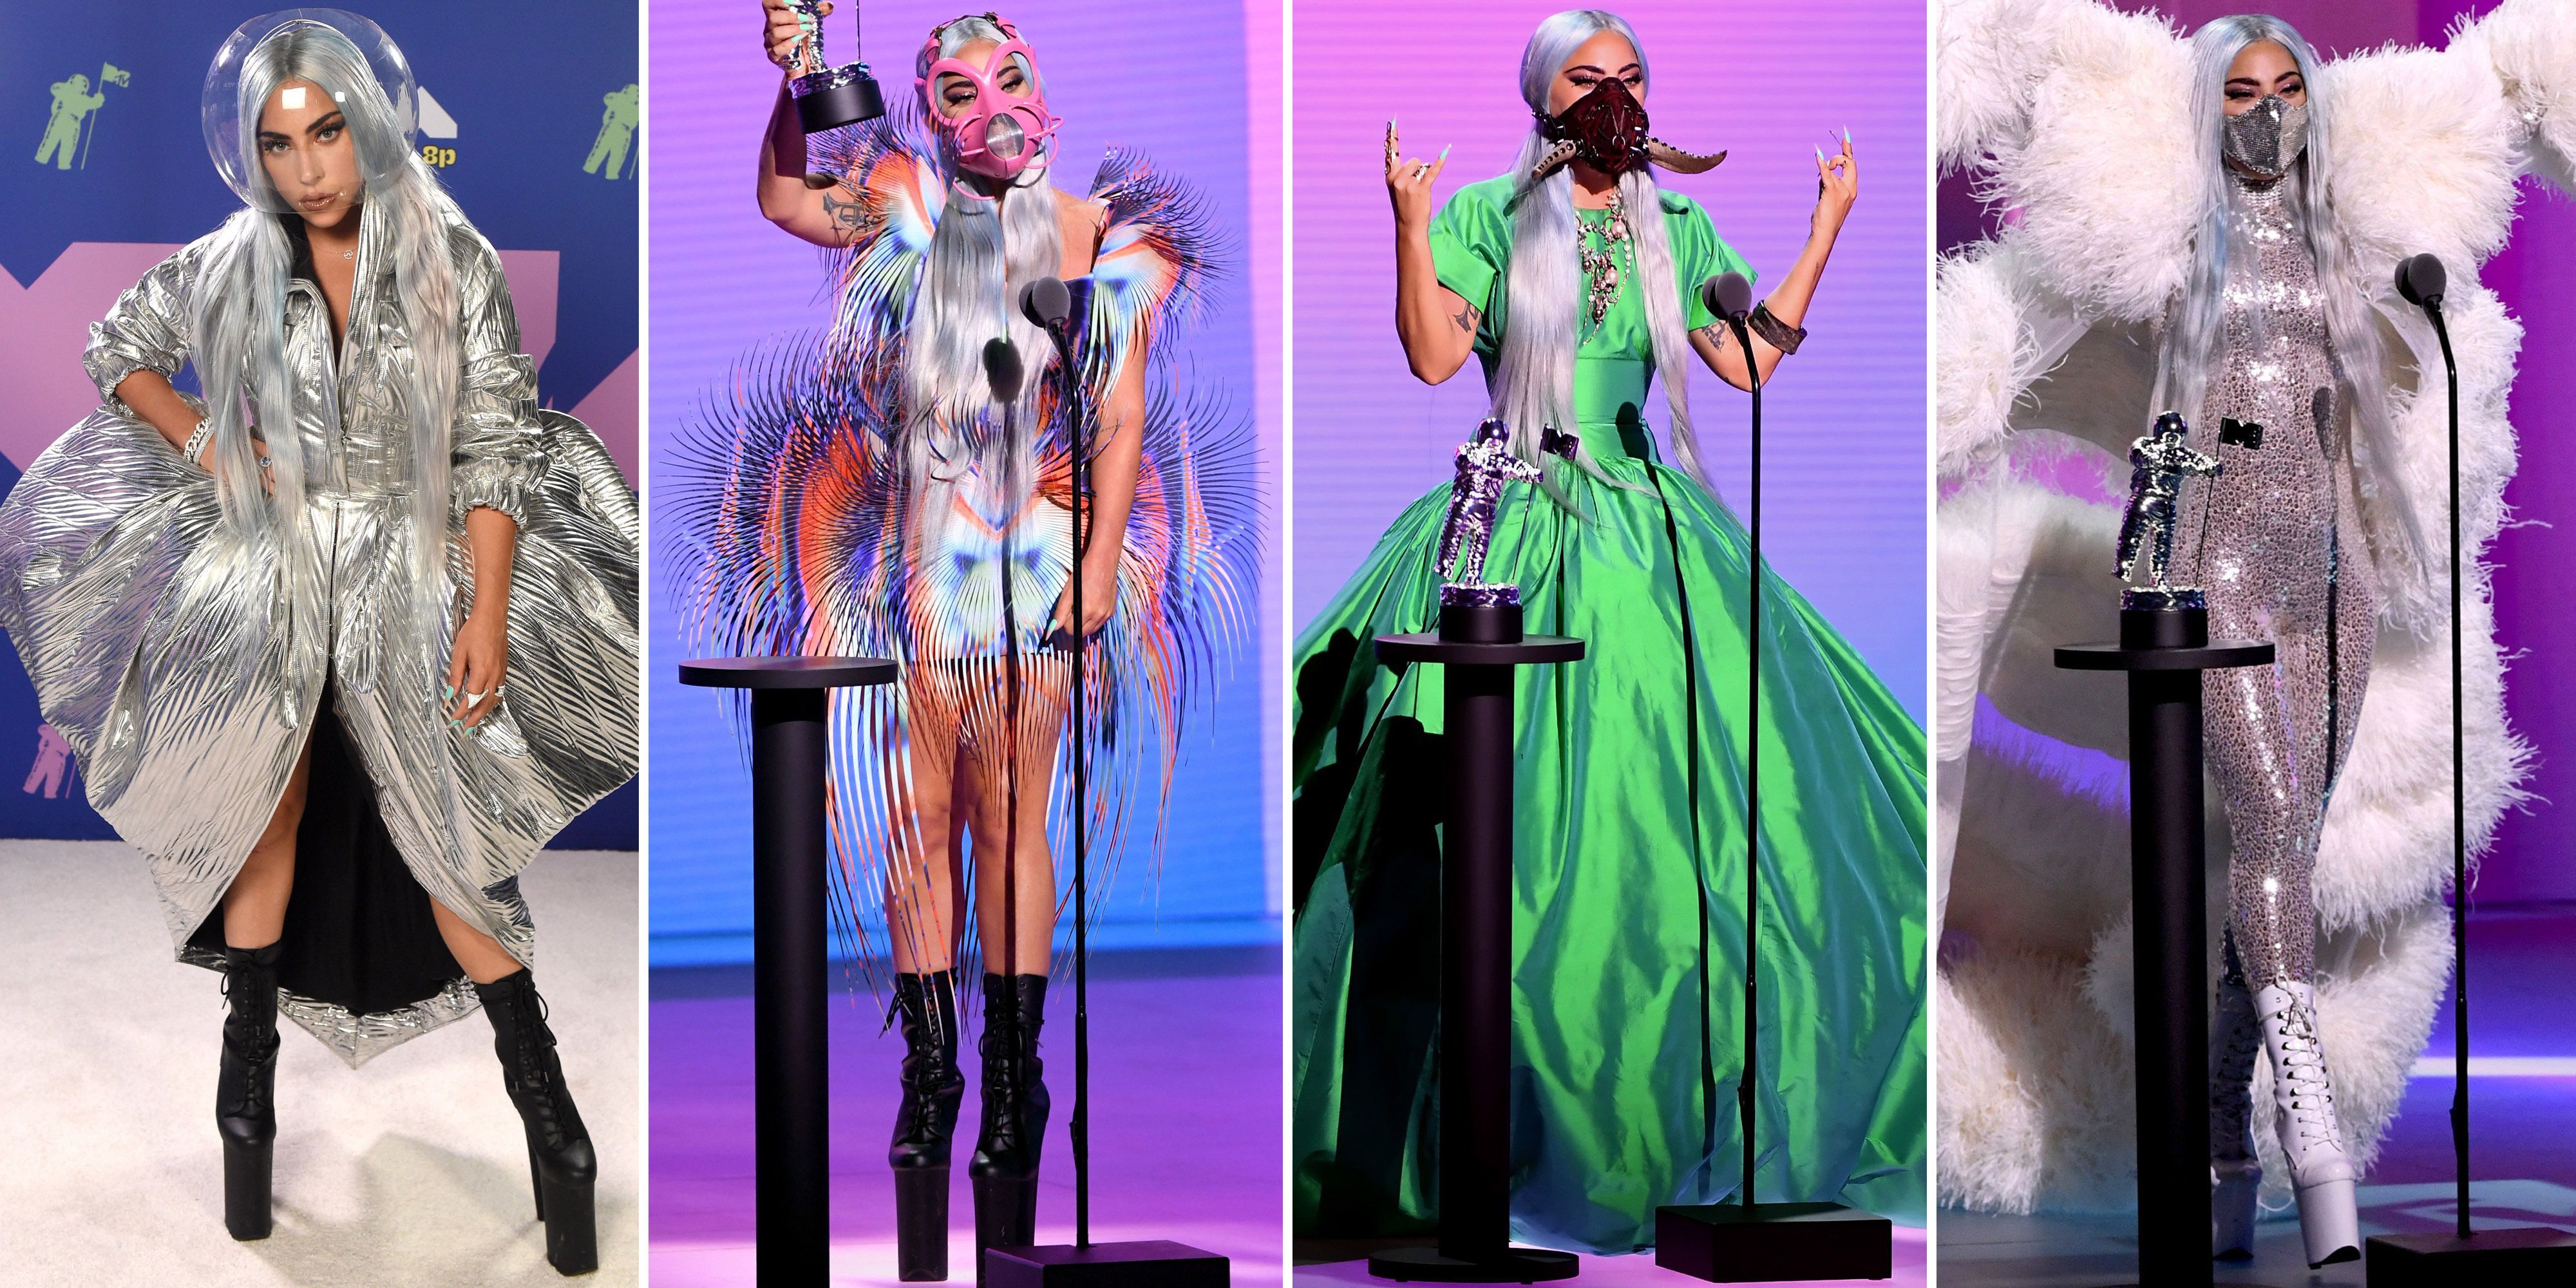 Outfits at the 2020 Video Music Awards